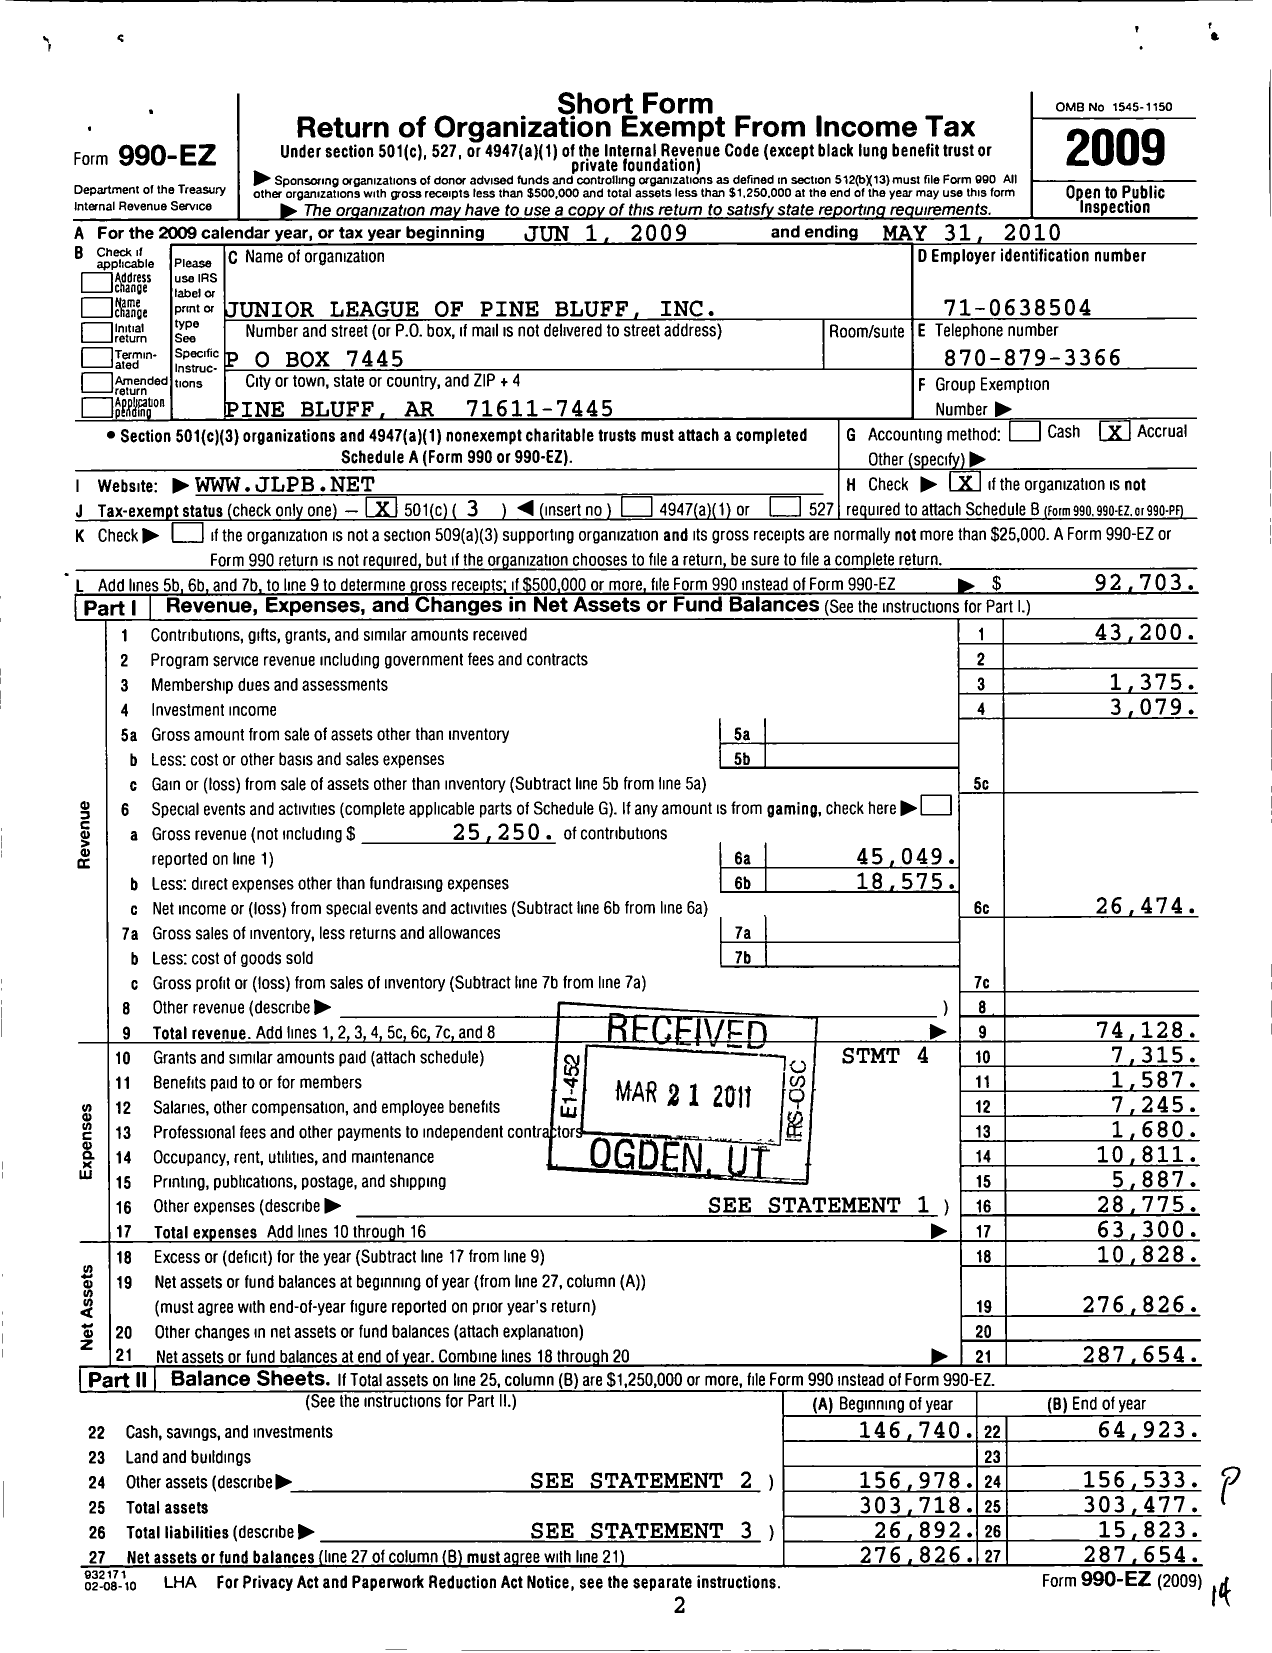 Image of first page of 2009 Form 990EZ for The Junior League of Pine Bluff